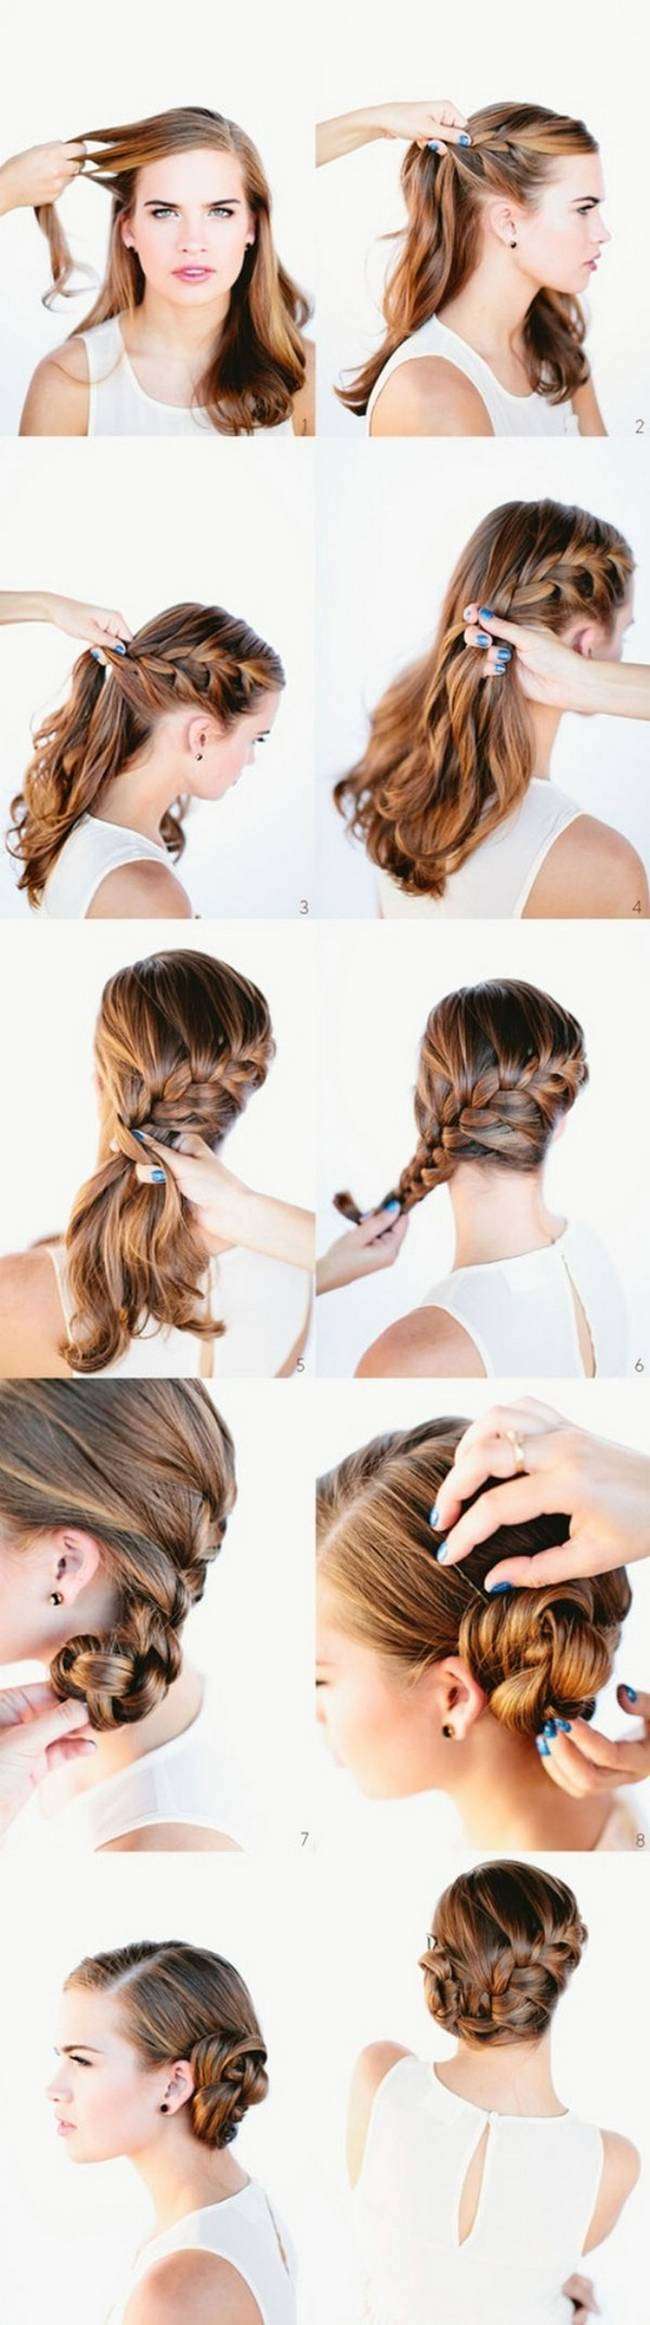 Holiday Hairstyle: Side Bun Tutorial In 4 Easy Steps | MomsWhoSave.com